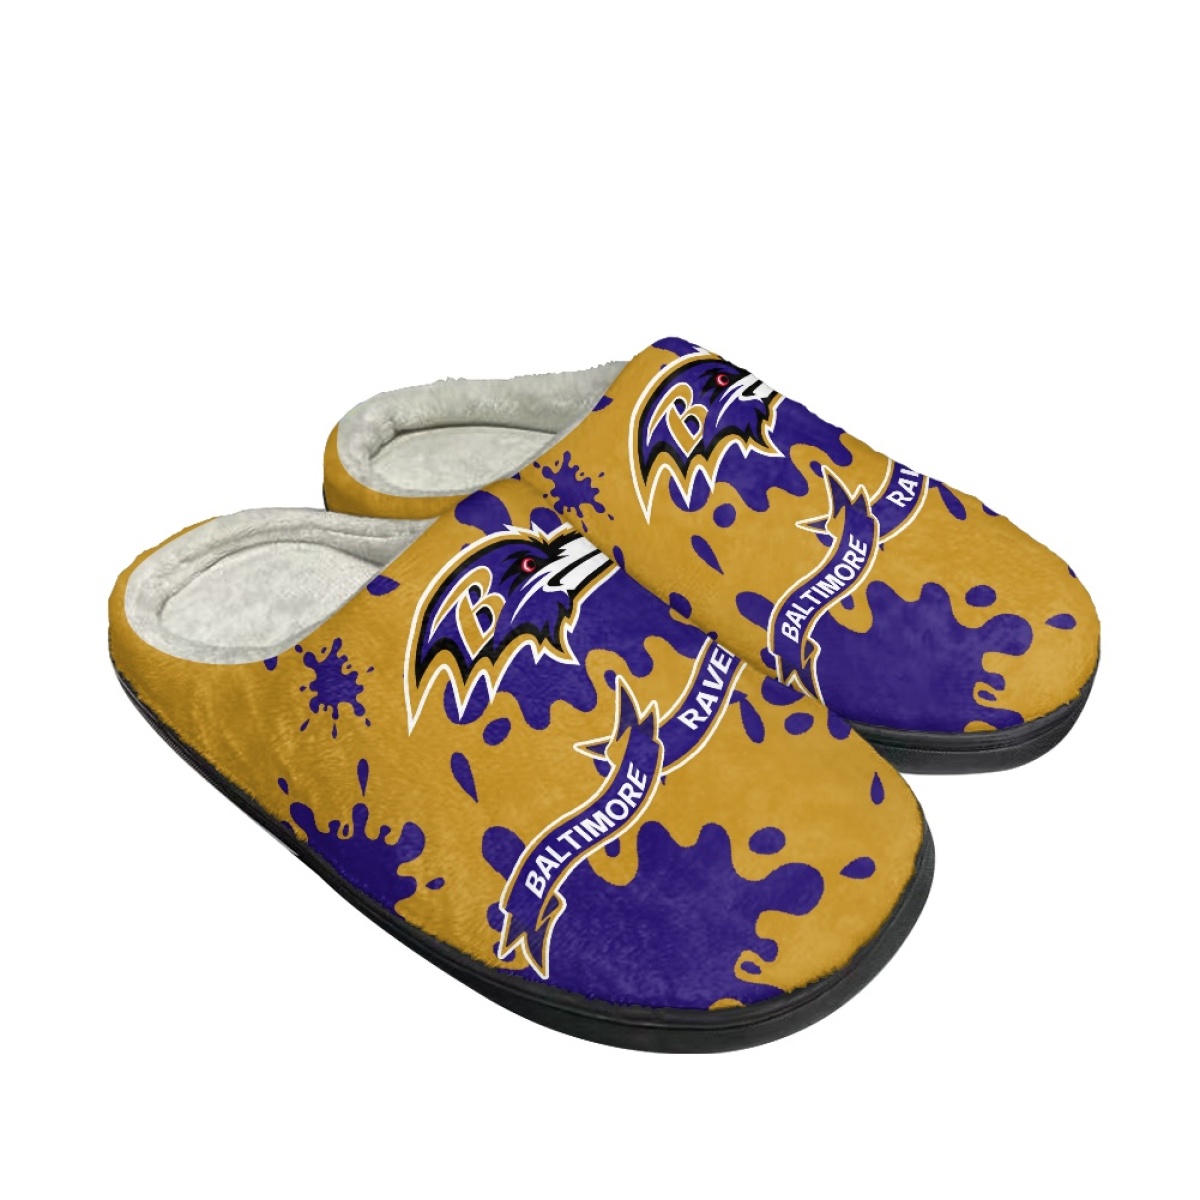 Women's Baltimore Ravens Slippers/Shoes 005